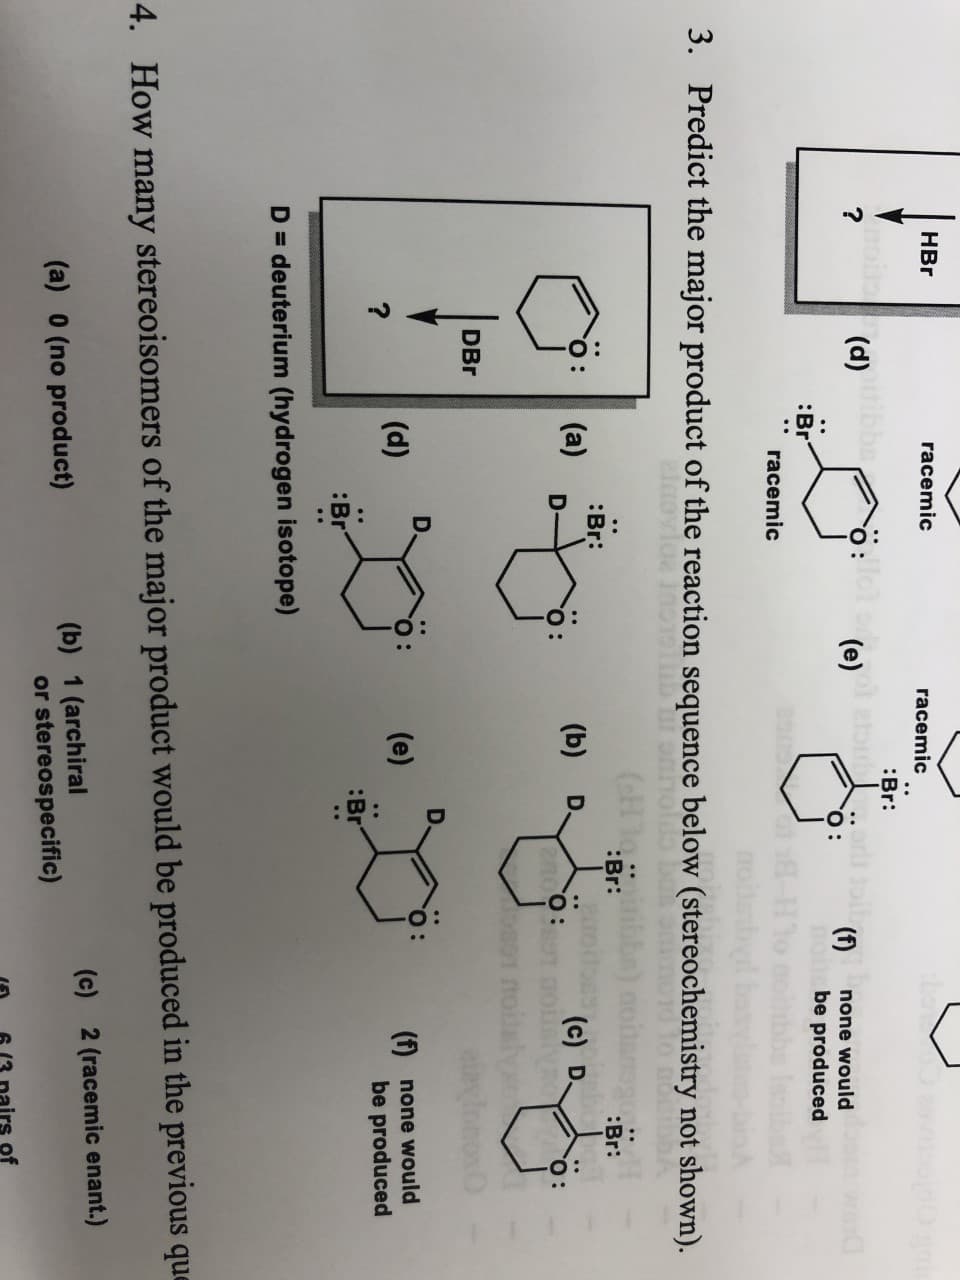 HBr
racemic
racemic
Oan
Br:
(d)bb
nc
"О:
?
e)
(1)
none would
be produced
Br
racemic
3.
Predict the major product of the reaction sequence below (stereochemistry not shown).
(GE 10.Br
:Br:
Br:
(a)
(b)
D.
(c) D
no:
DBr
D.
D.
(d)
(e)
f
none would
be produced
?
:Br
:Br
D= deuterium (hydrogen isotope)
4.
How many stereoisomers of the major product would be produced in the previous que
(c)
2 (racemic enant.)
(b) 1 (archiral
or stereospecific)
(a) 0 (no product)
of
